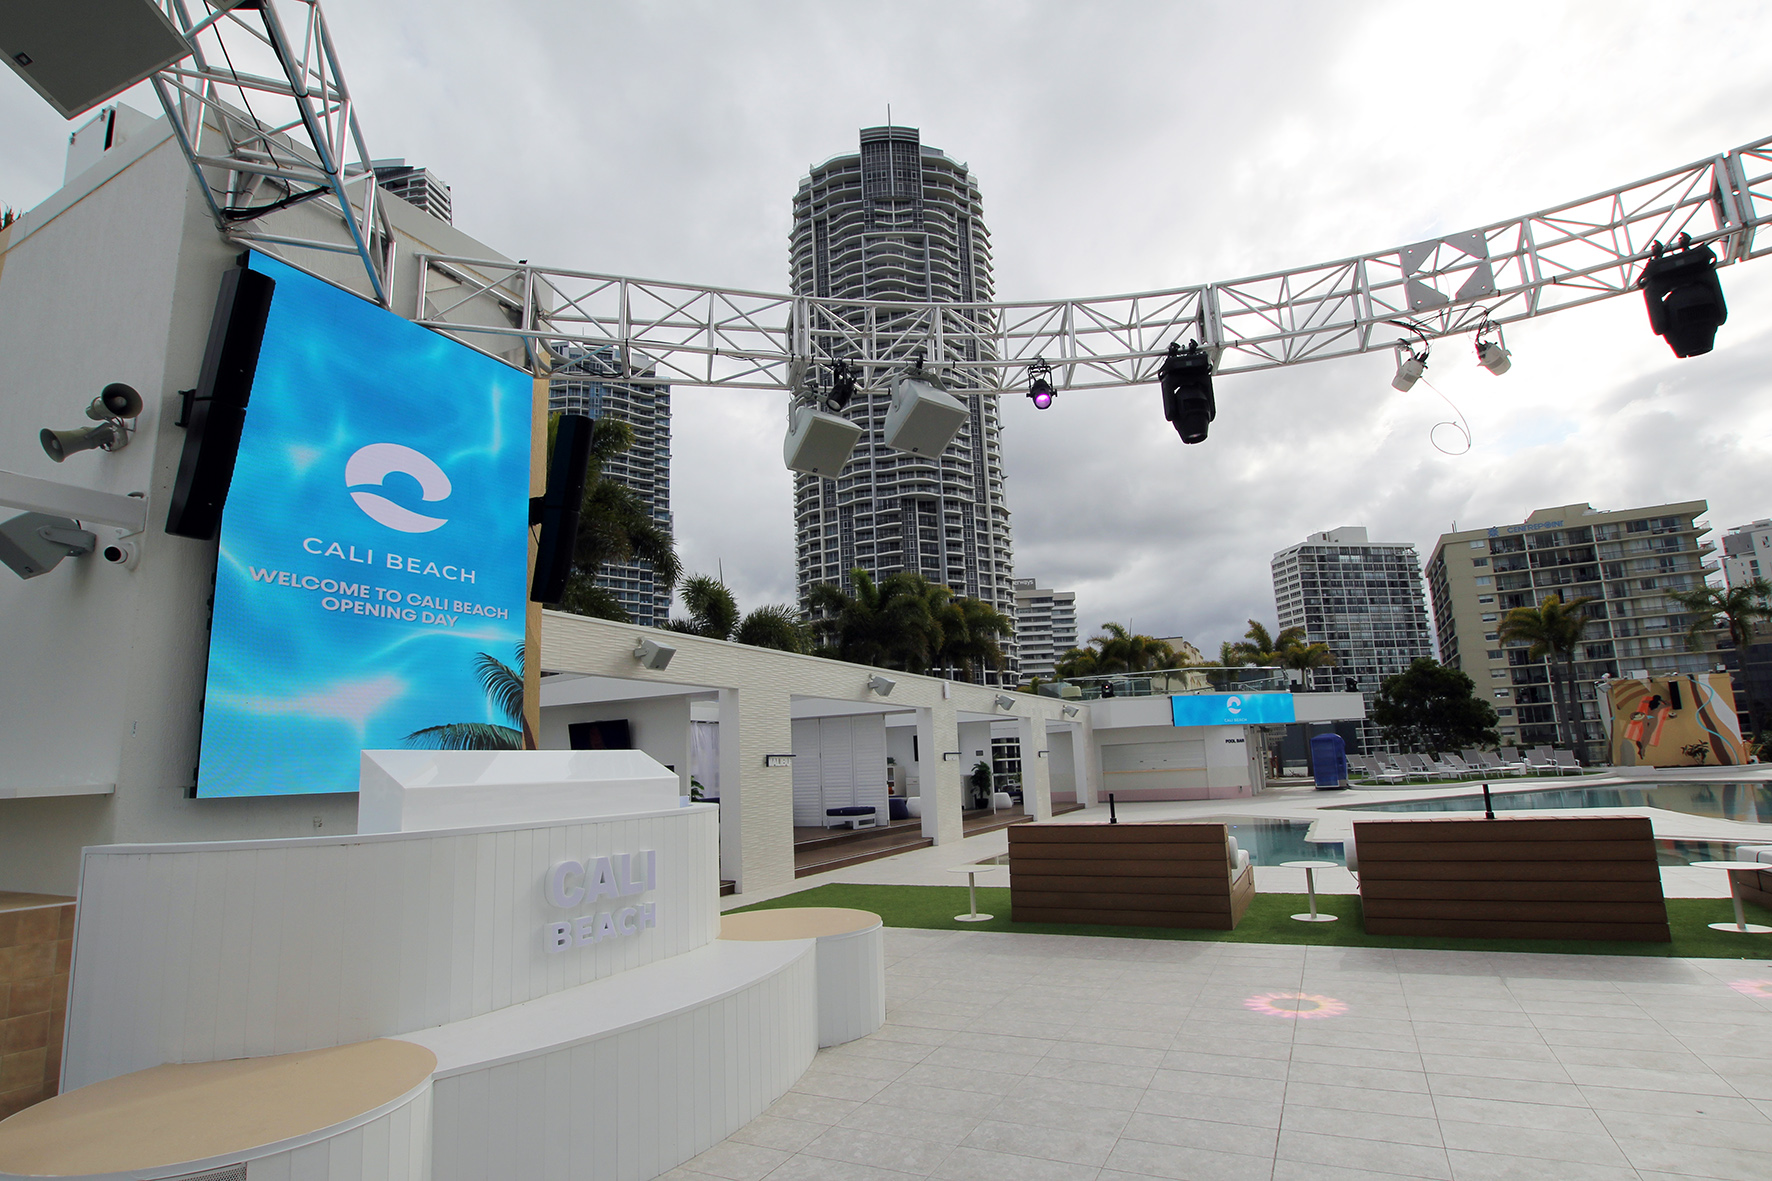 A 10m wide x 1m high LED screen is facing the pool area